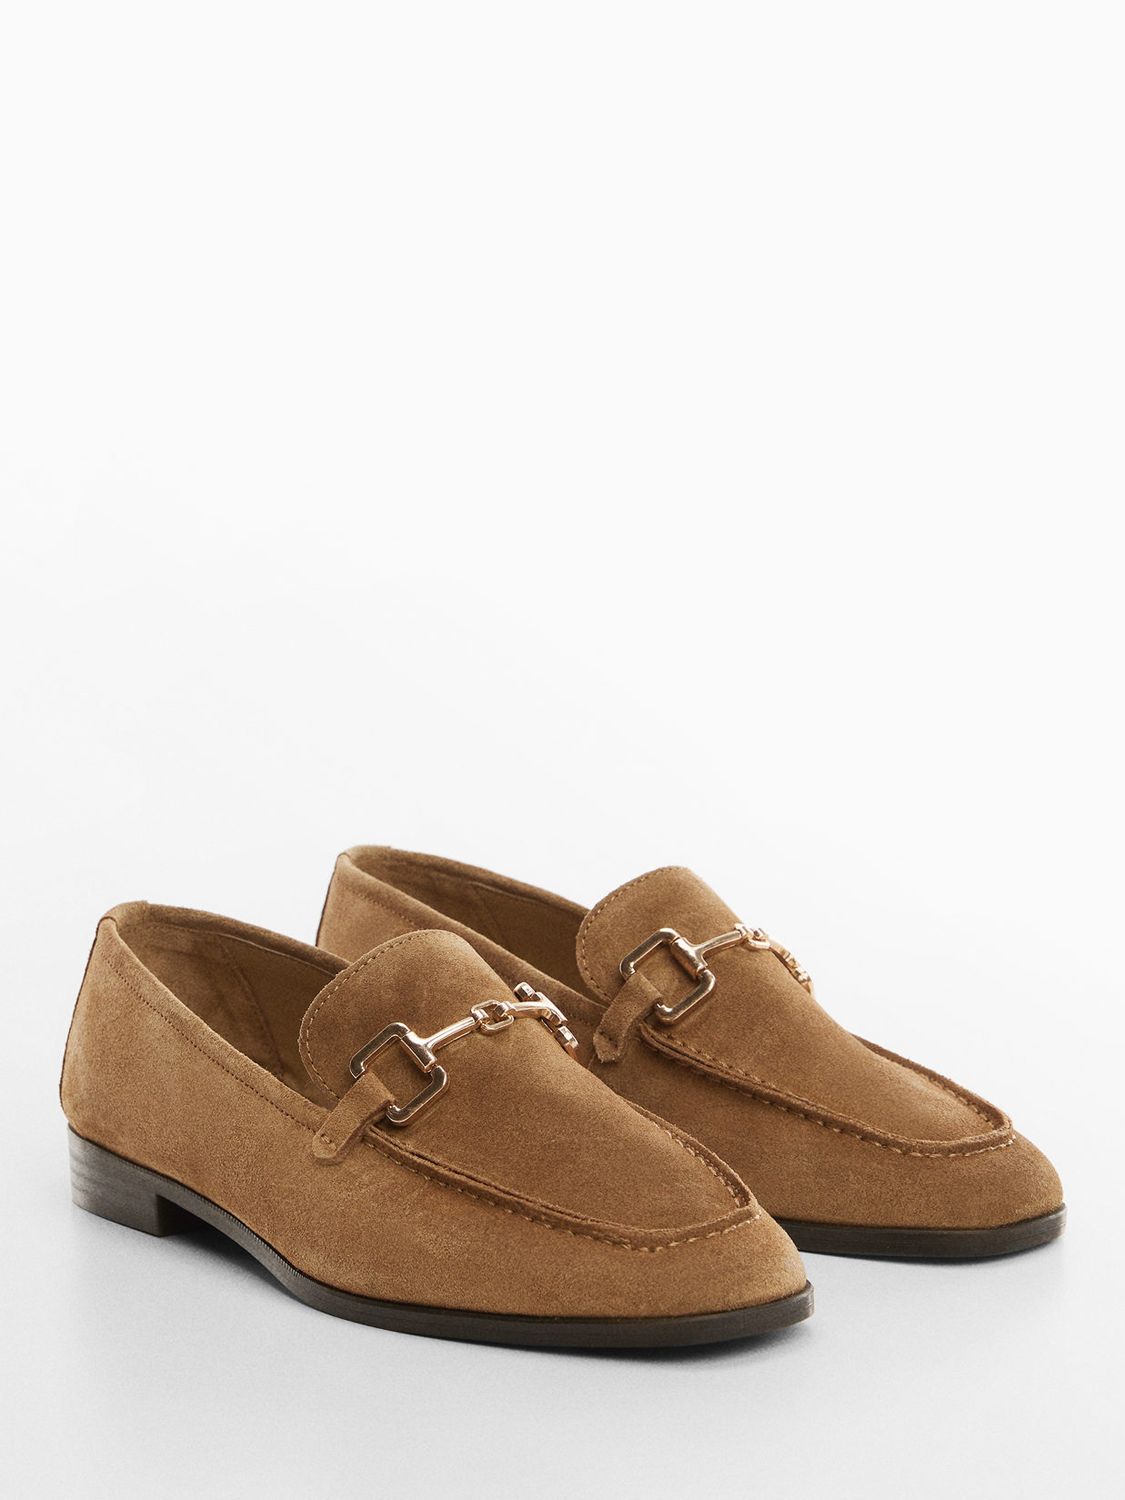 Mango Luz Suede Moccasin Loafers, Tan at John Lewis & Partners